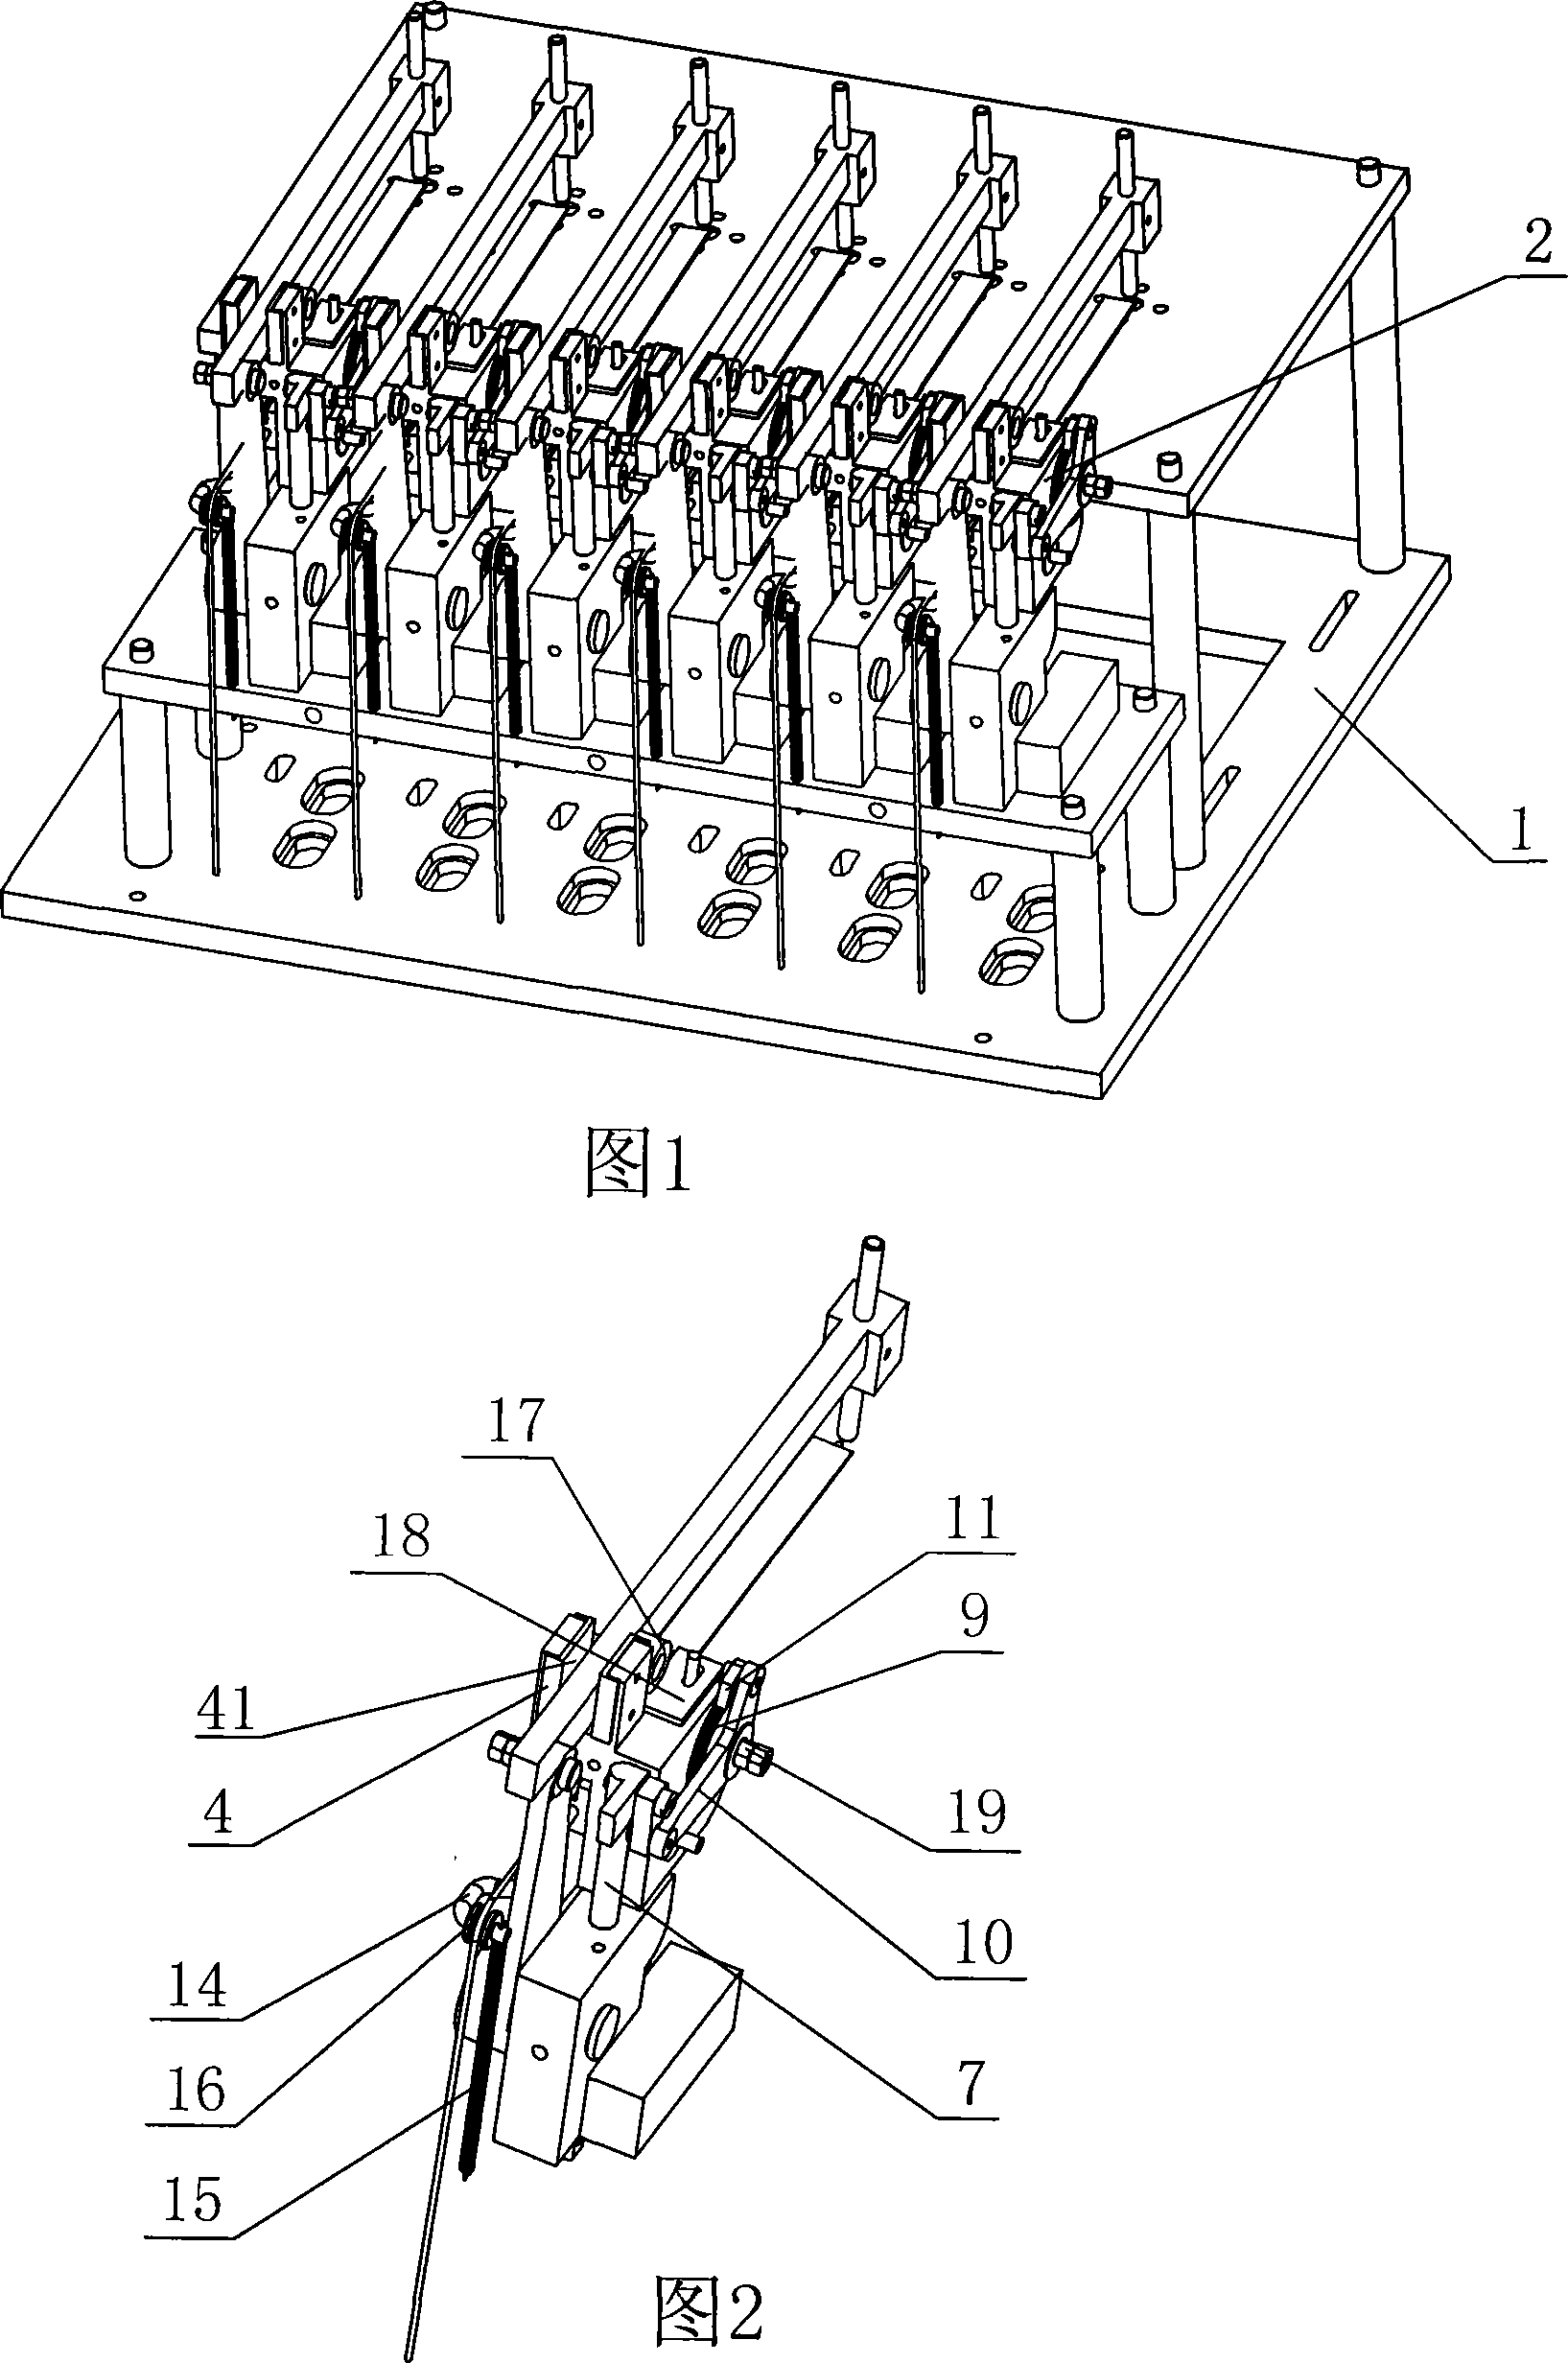 Wire lead solder device for screw energy conserving lamp assembling production